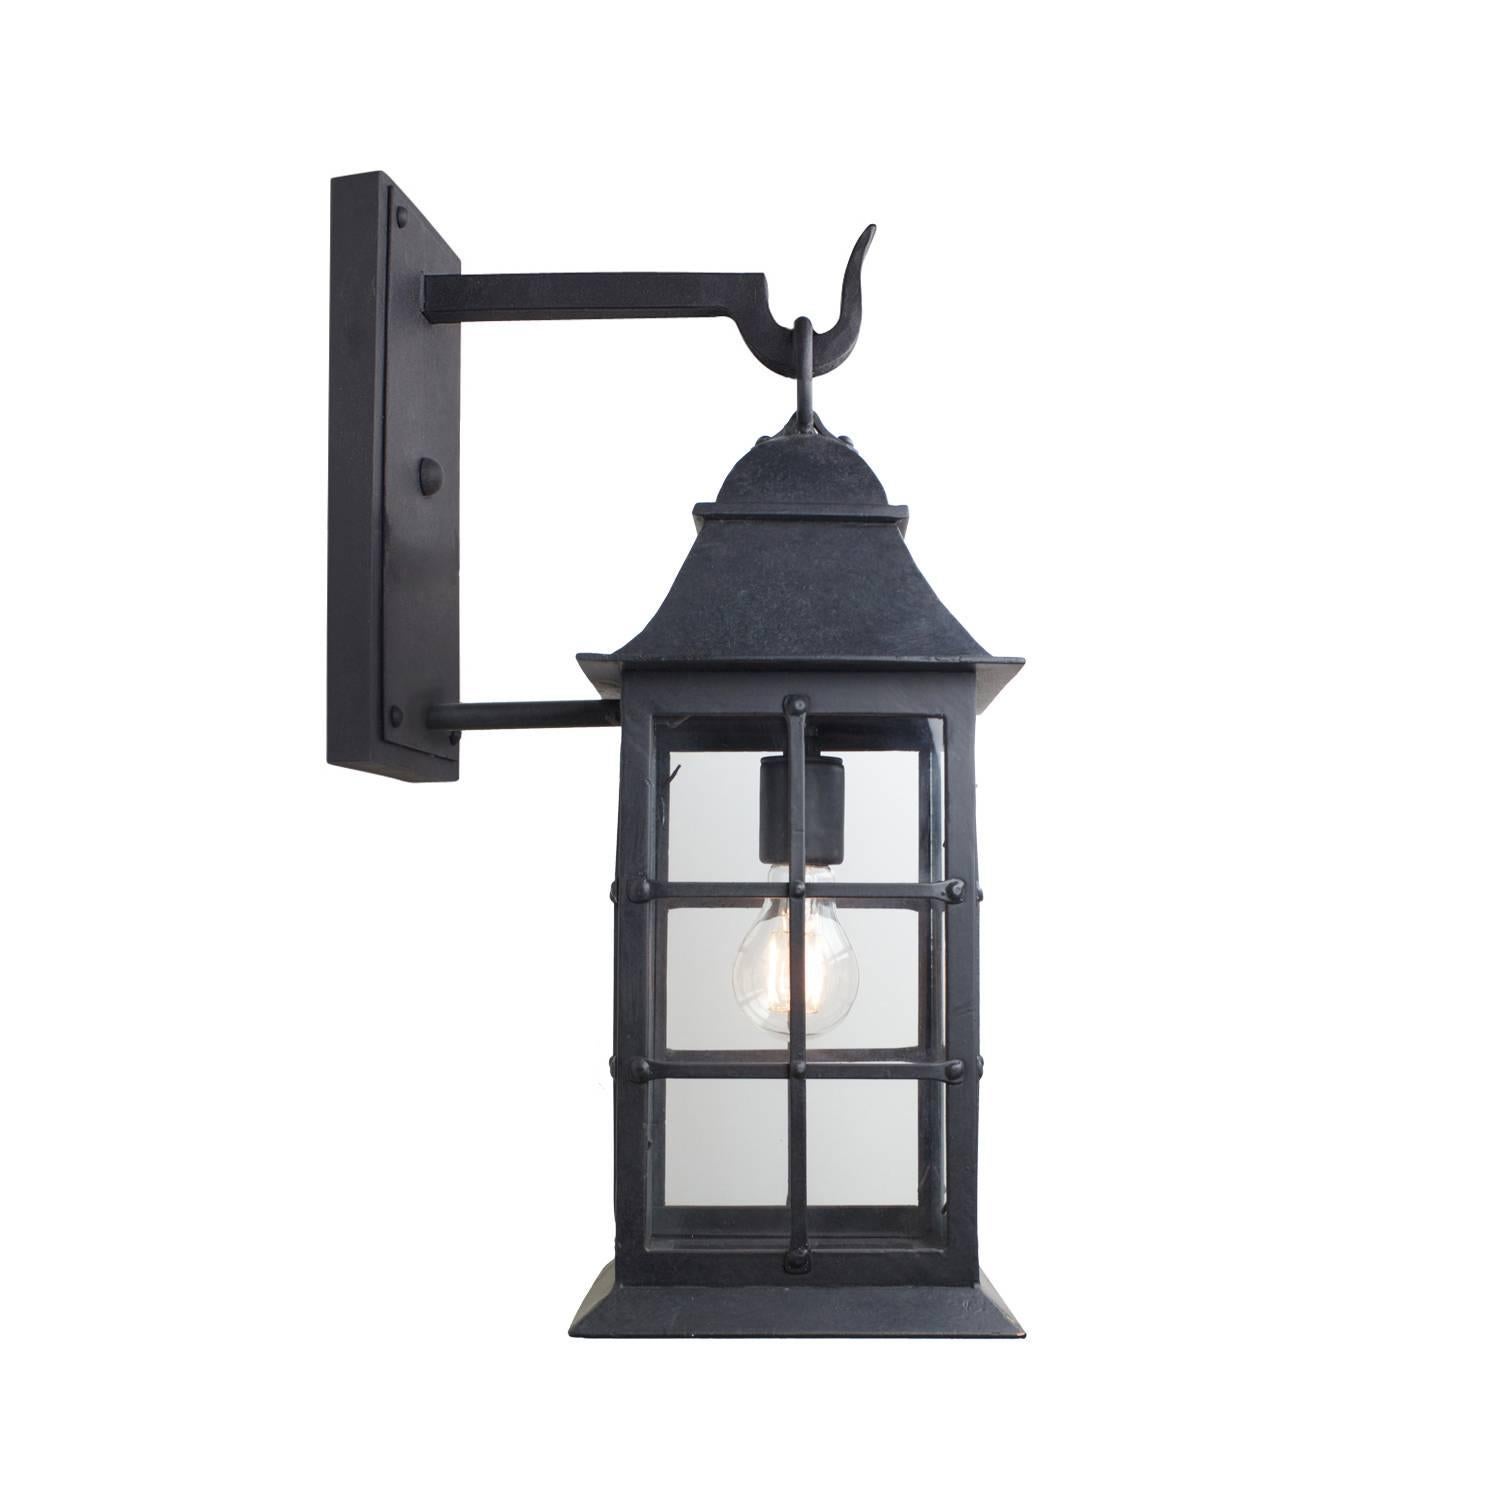 In the 1940's, the Miramar hotel became a coastal landmark, as the weekend getaway for Los Angelinos looking to escape the city. With its cozy cottages and beachy clean appeal, the Miramar hotel had a simple style. Our Miramar lantern brings an